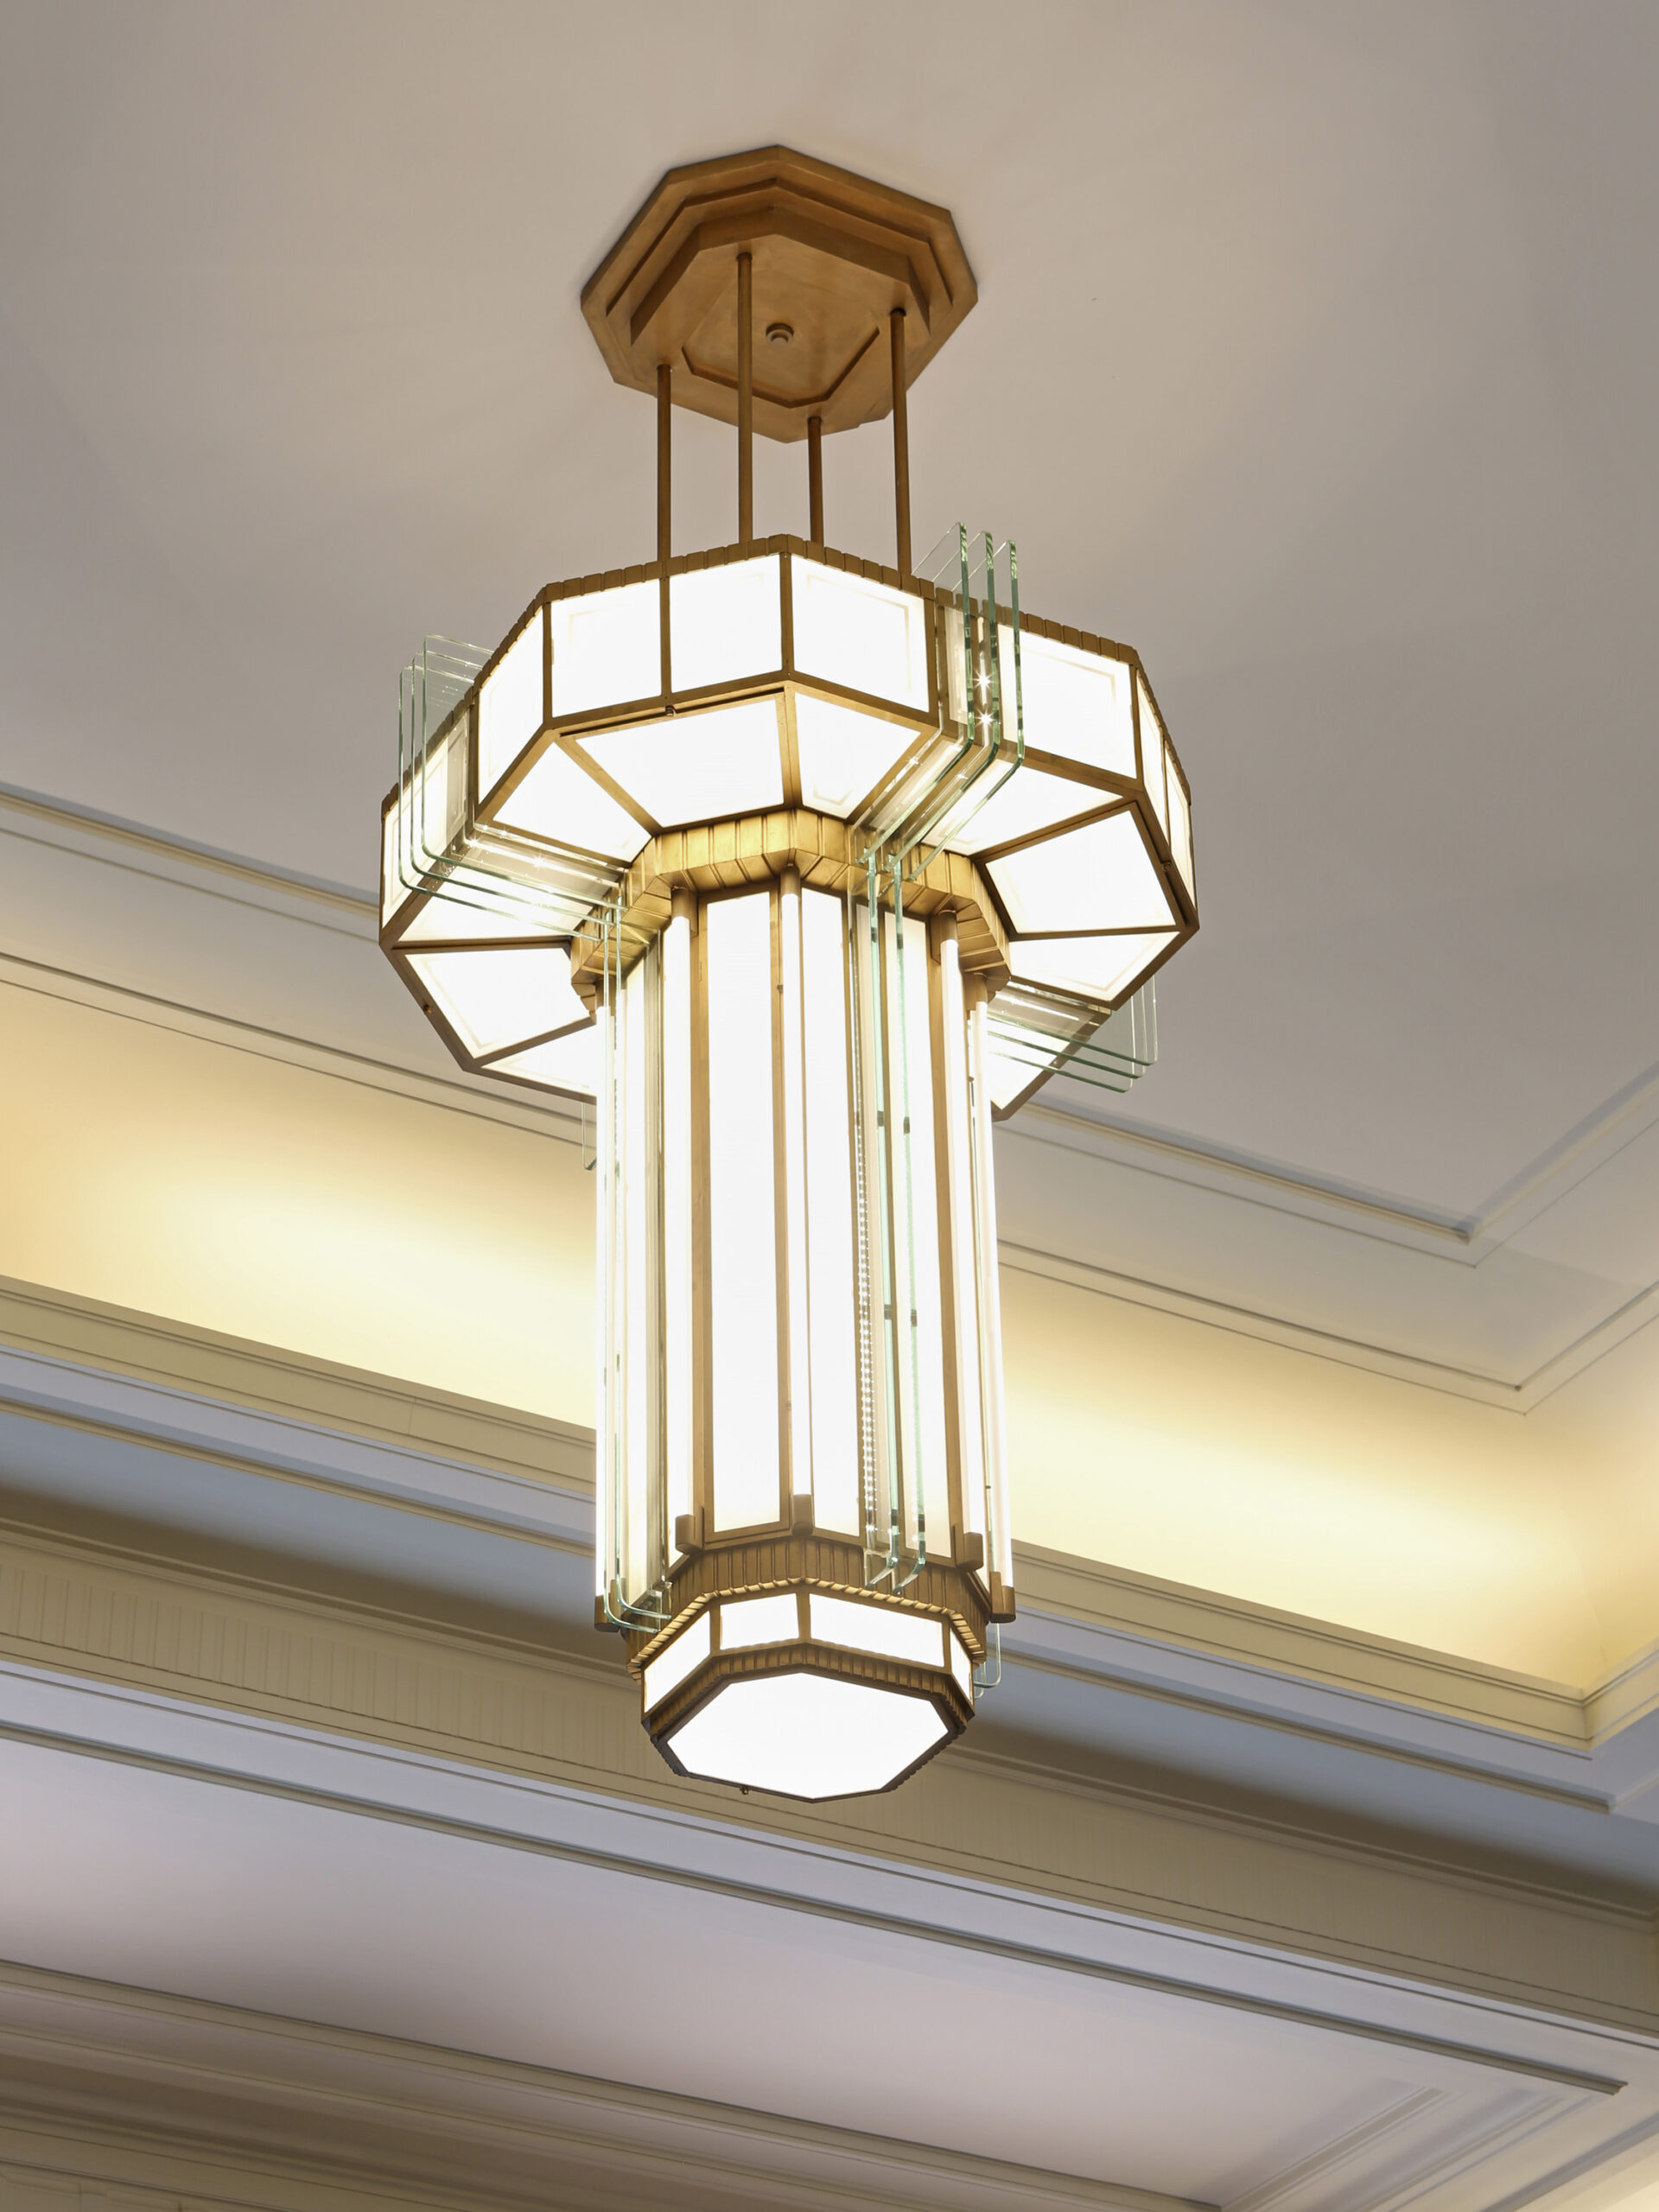 Hanging, art-deco style light fixture at Hackney Town Hall